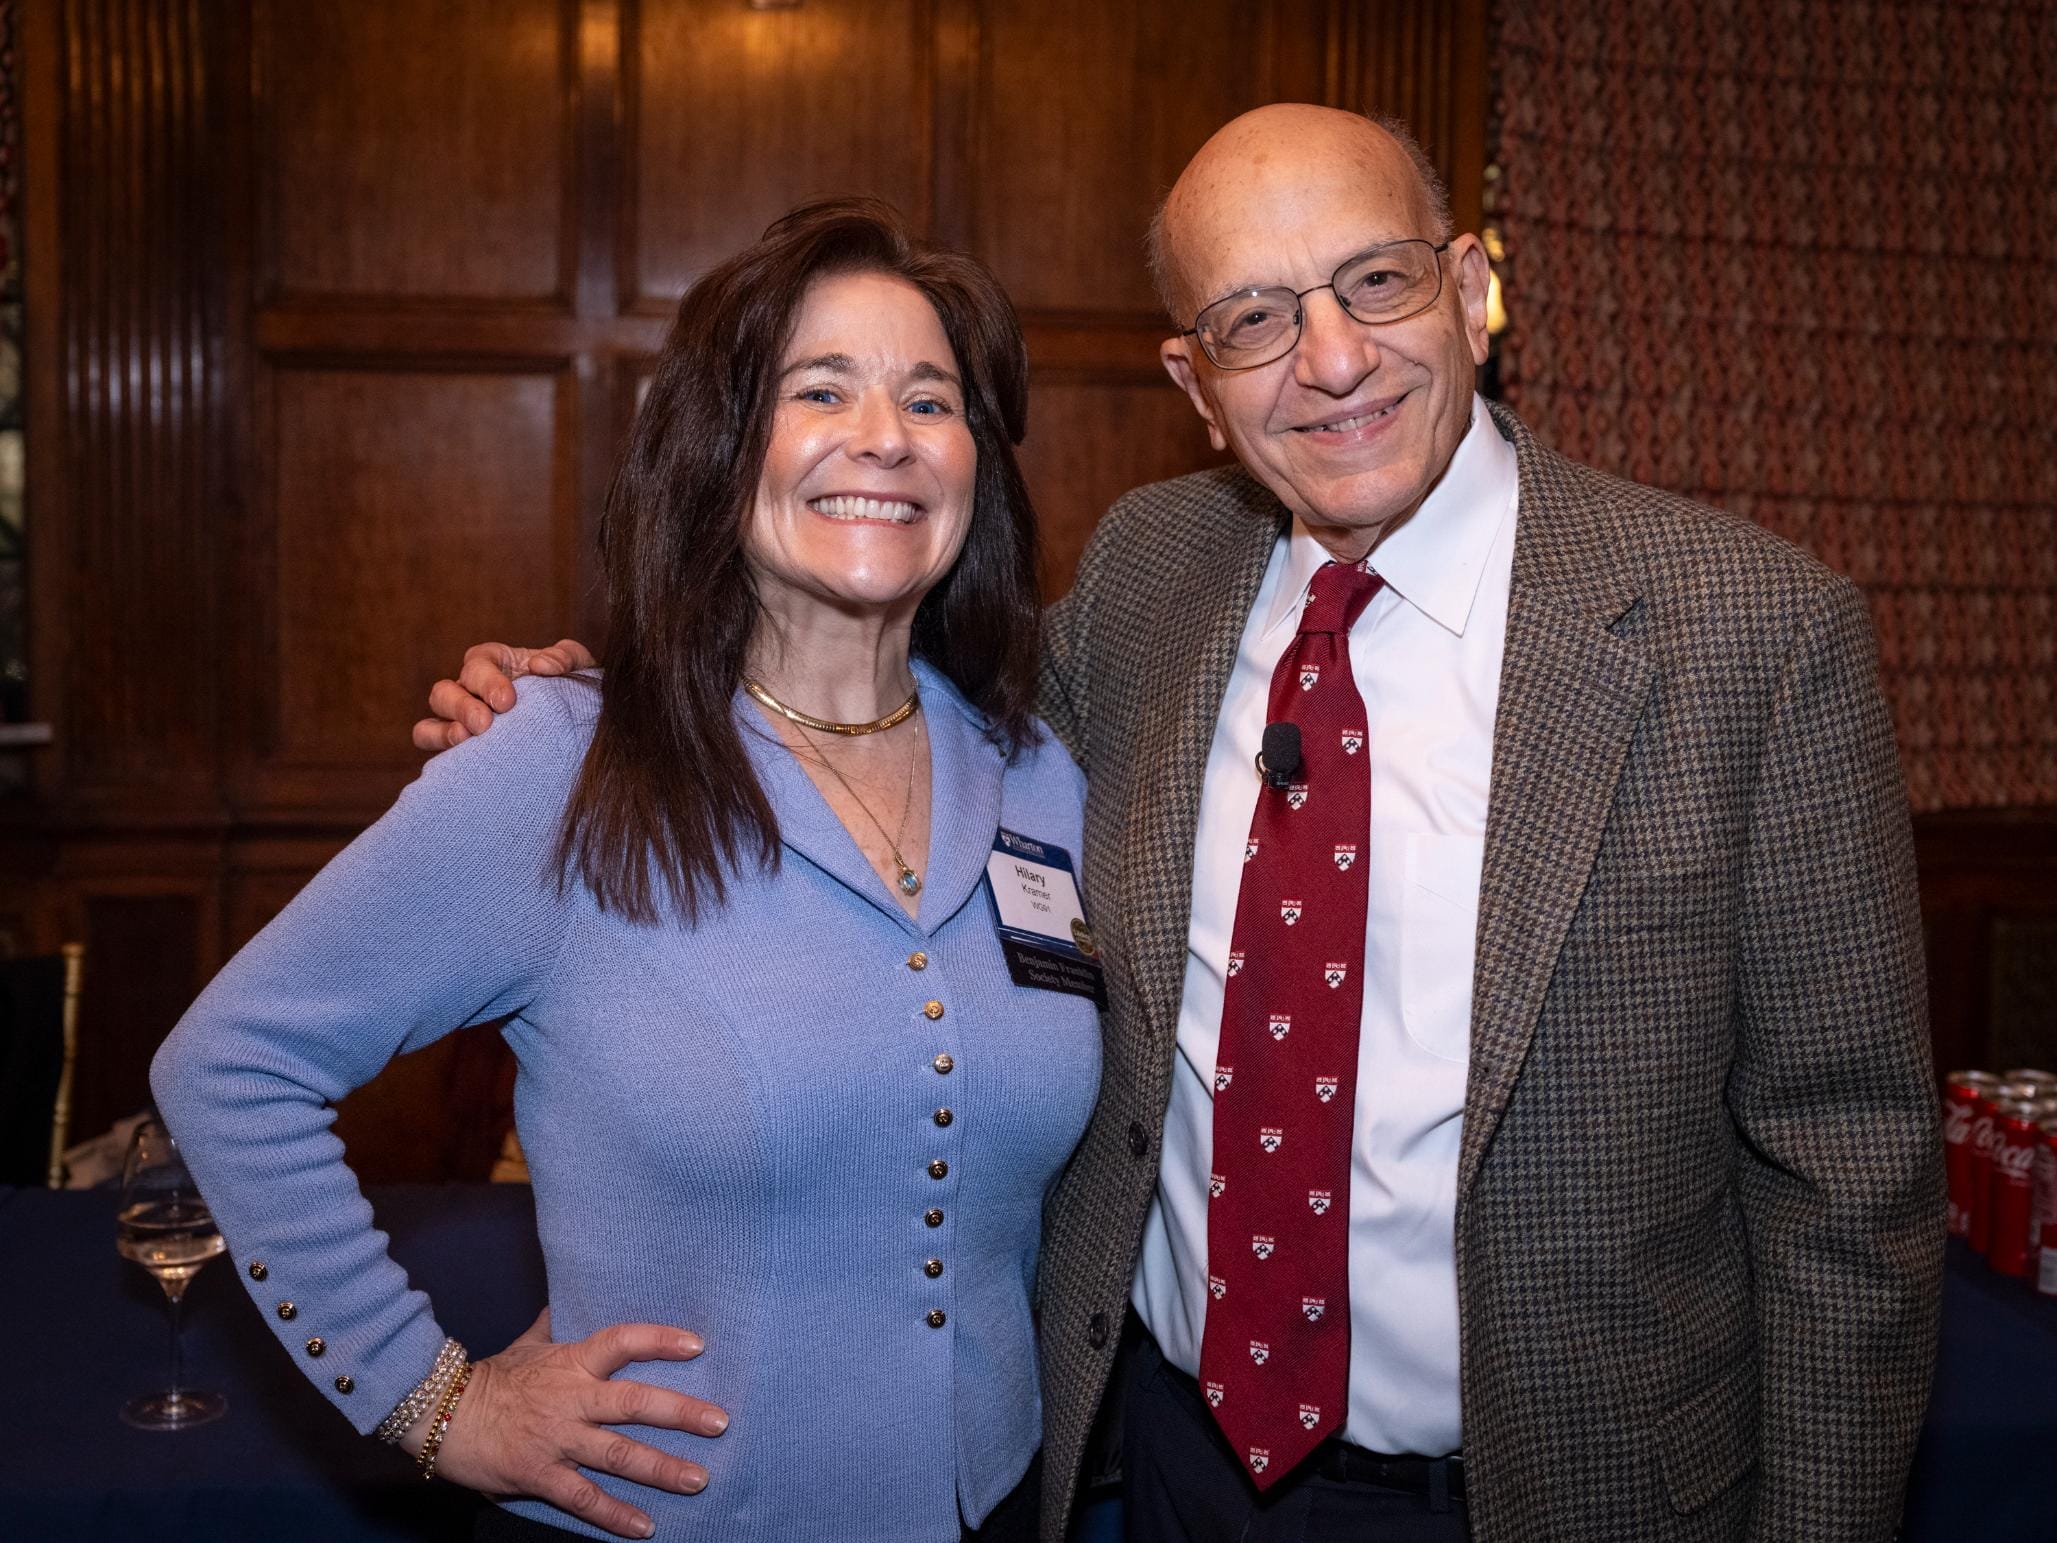 Hilary Kramer in a light blue sweater poses with Jeremy Siegel in a brown suit jacket, white shirt, and red tie with Penn shields on it.